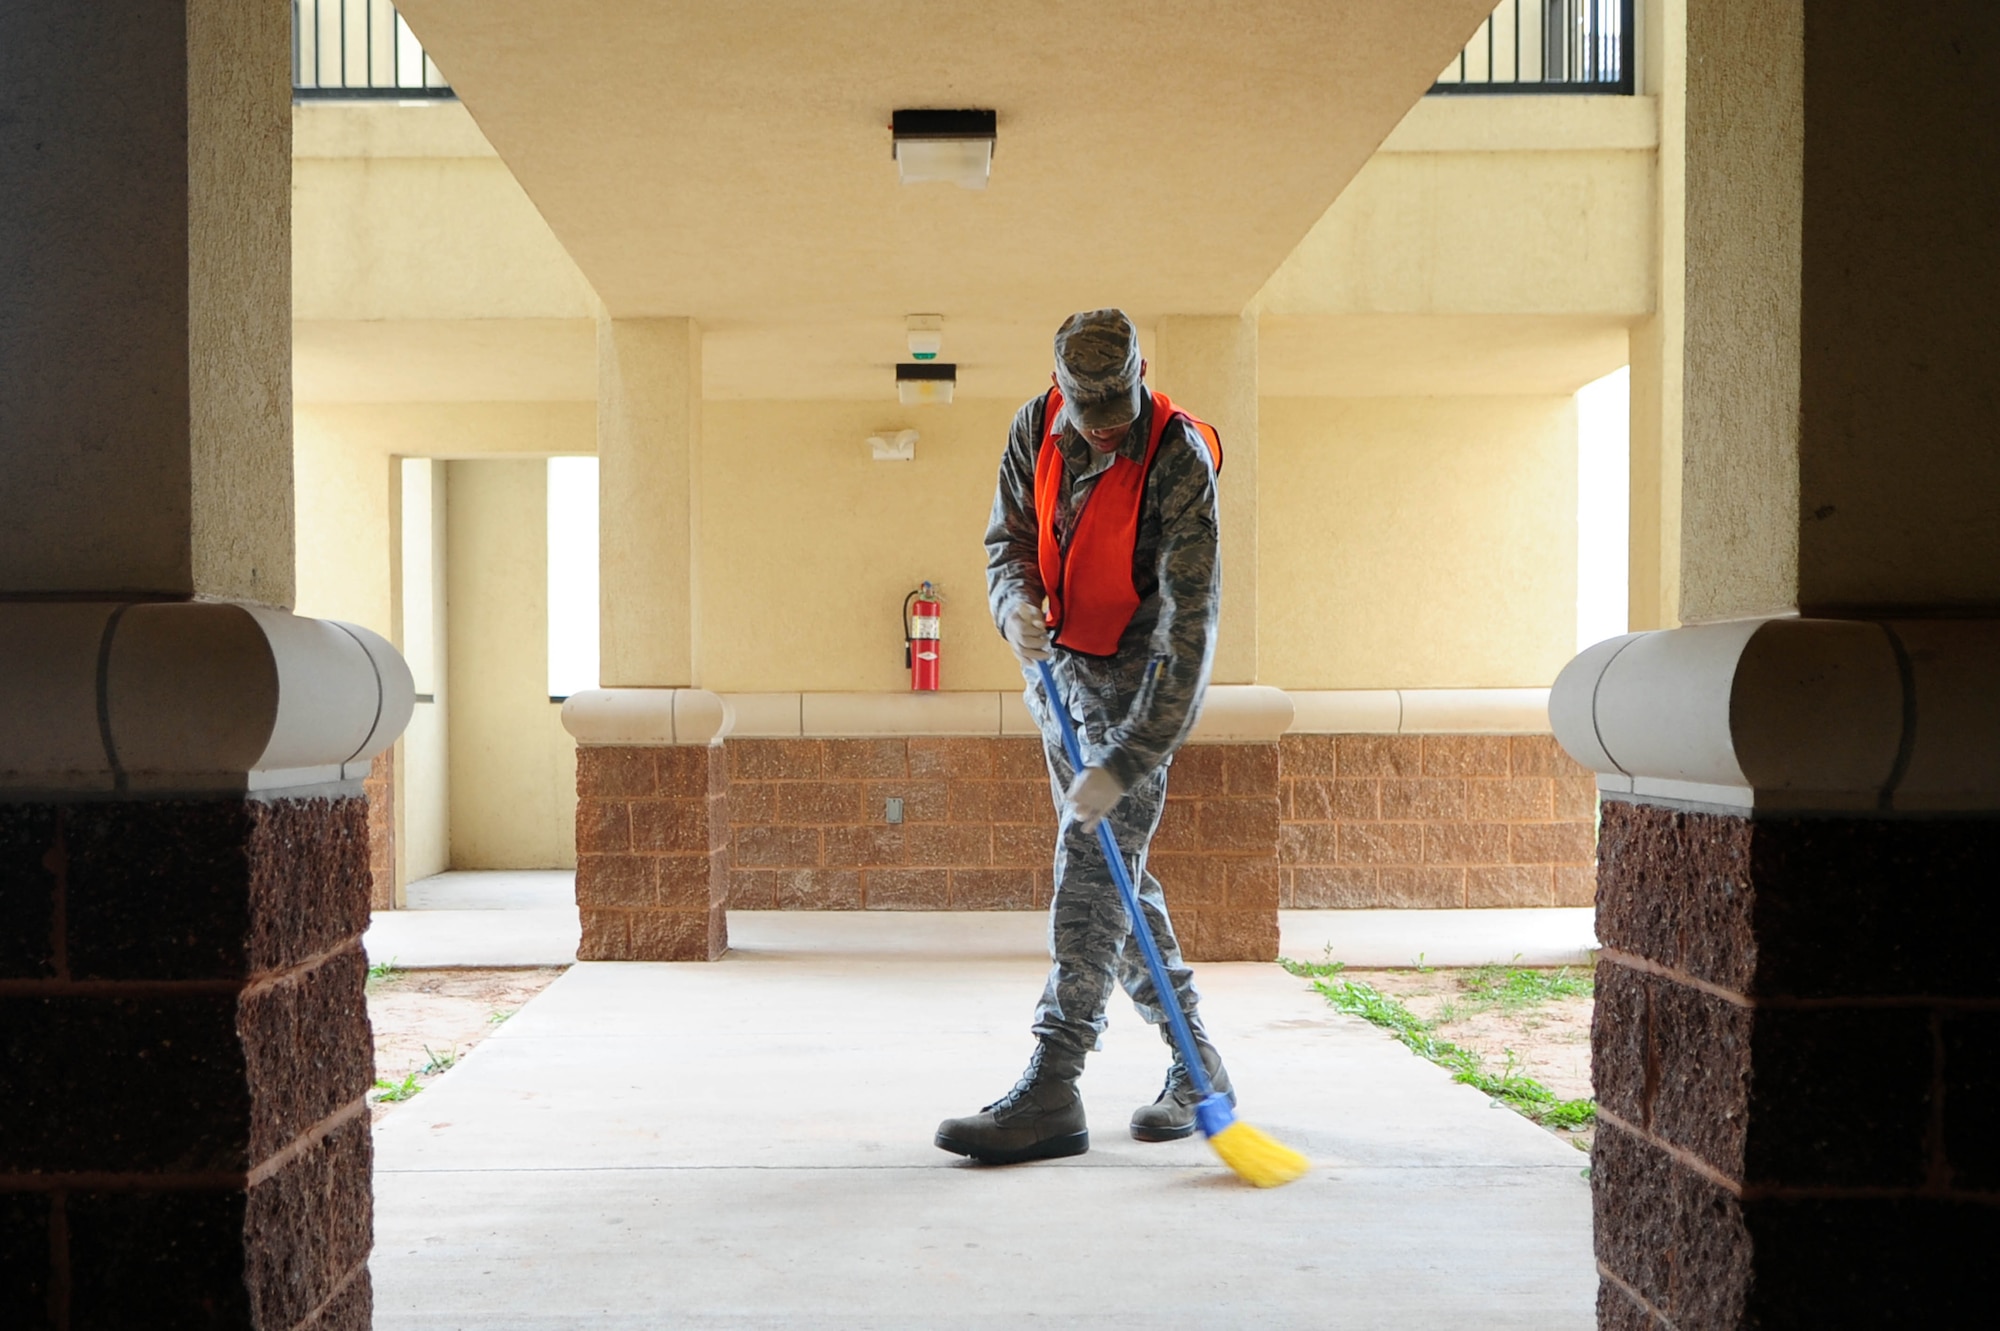 Airman 1st Class Jonathan Lowe, 2nd Maintenance Group, sweeps the corridors of the dormitories as part of his bay orderly duties at Barksdale Air Force Base, La., Nov. 9. Bay orderly is performed each week by airmen who live in the dorms; they ensure dormitory common areas stay clean and free of clutter. (U.S. Air Force photo/Senior Airman Joanna M. Kresge)